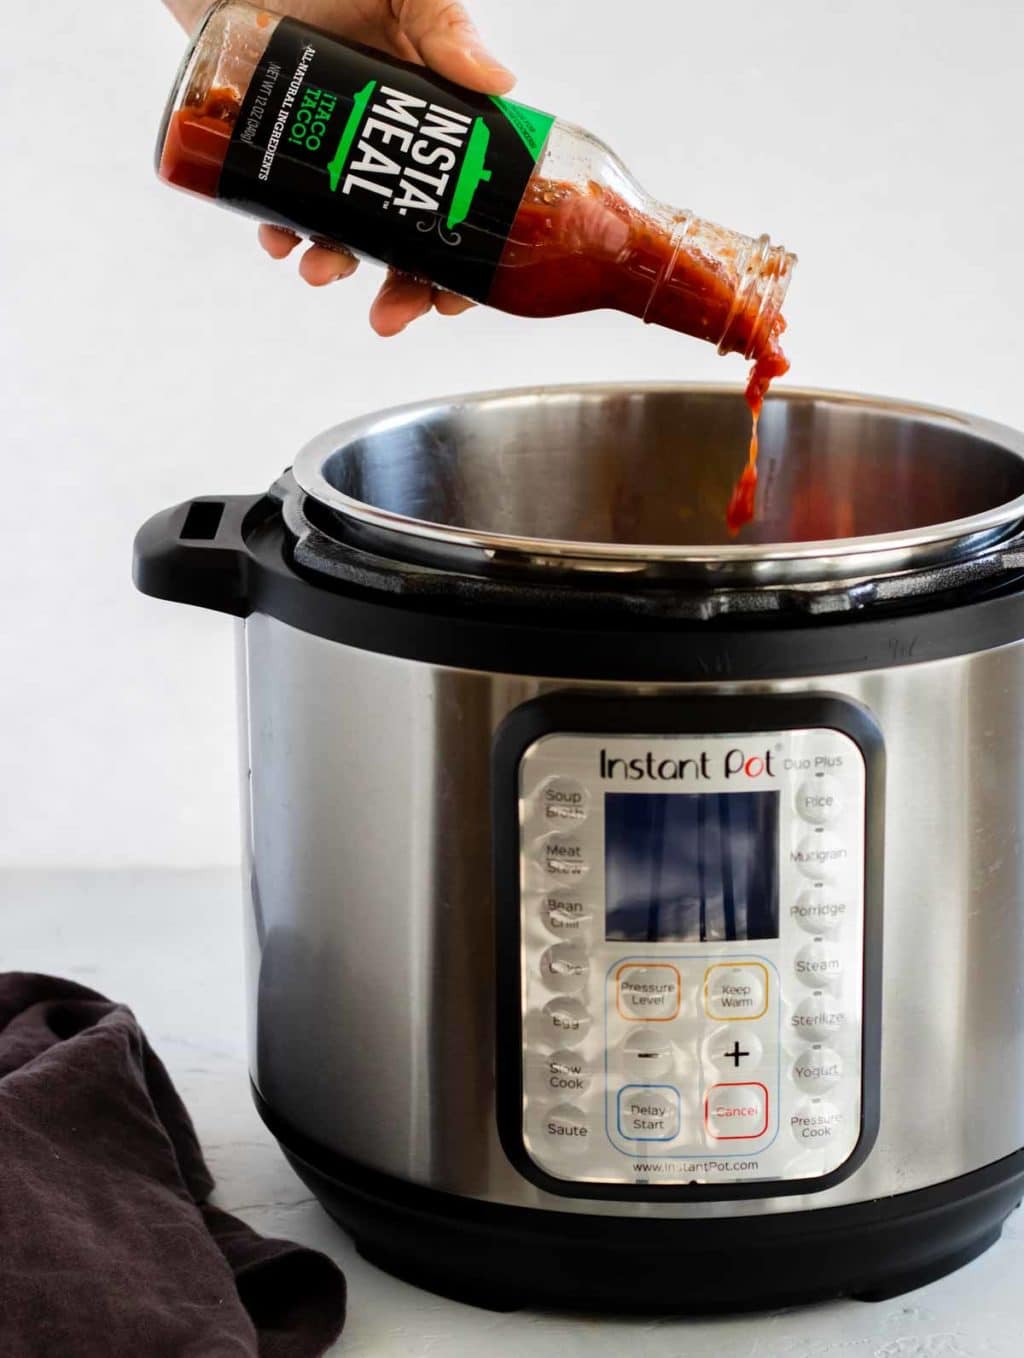 Insta-Meal Taco Taco sauce being poured into the Instant Pot